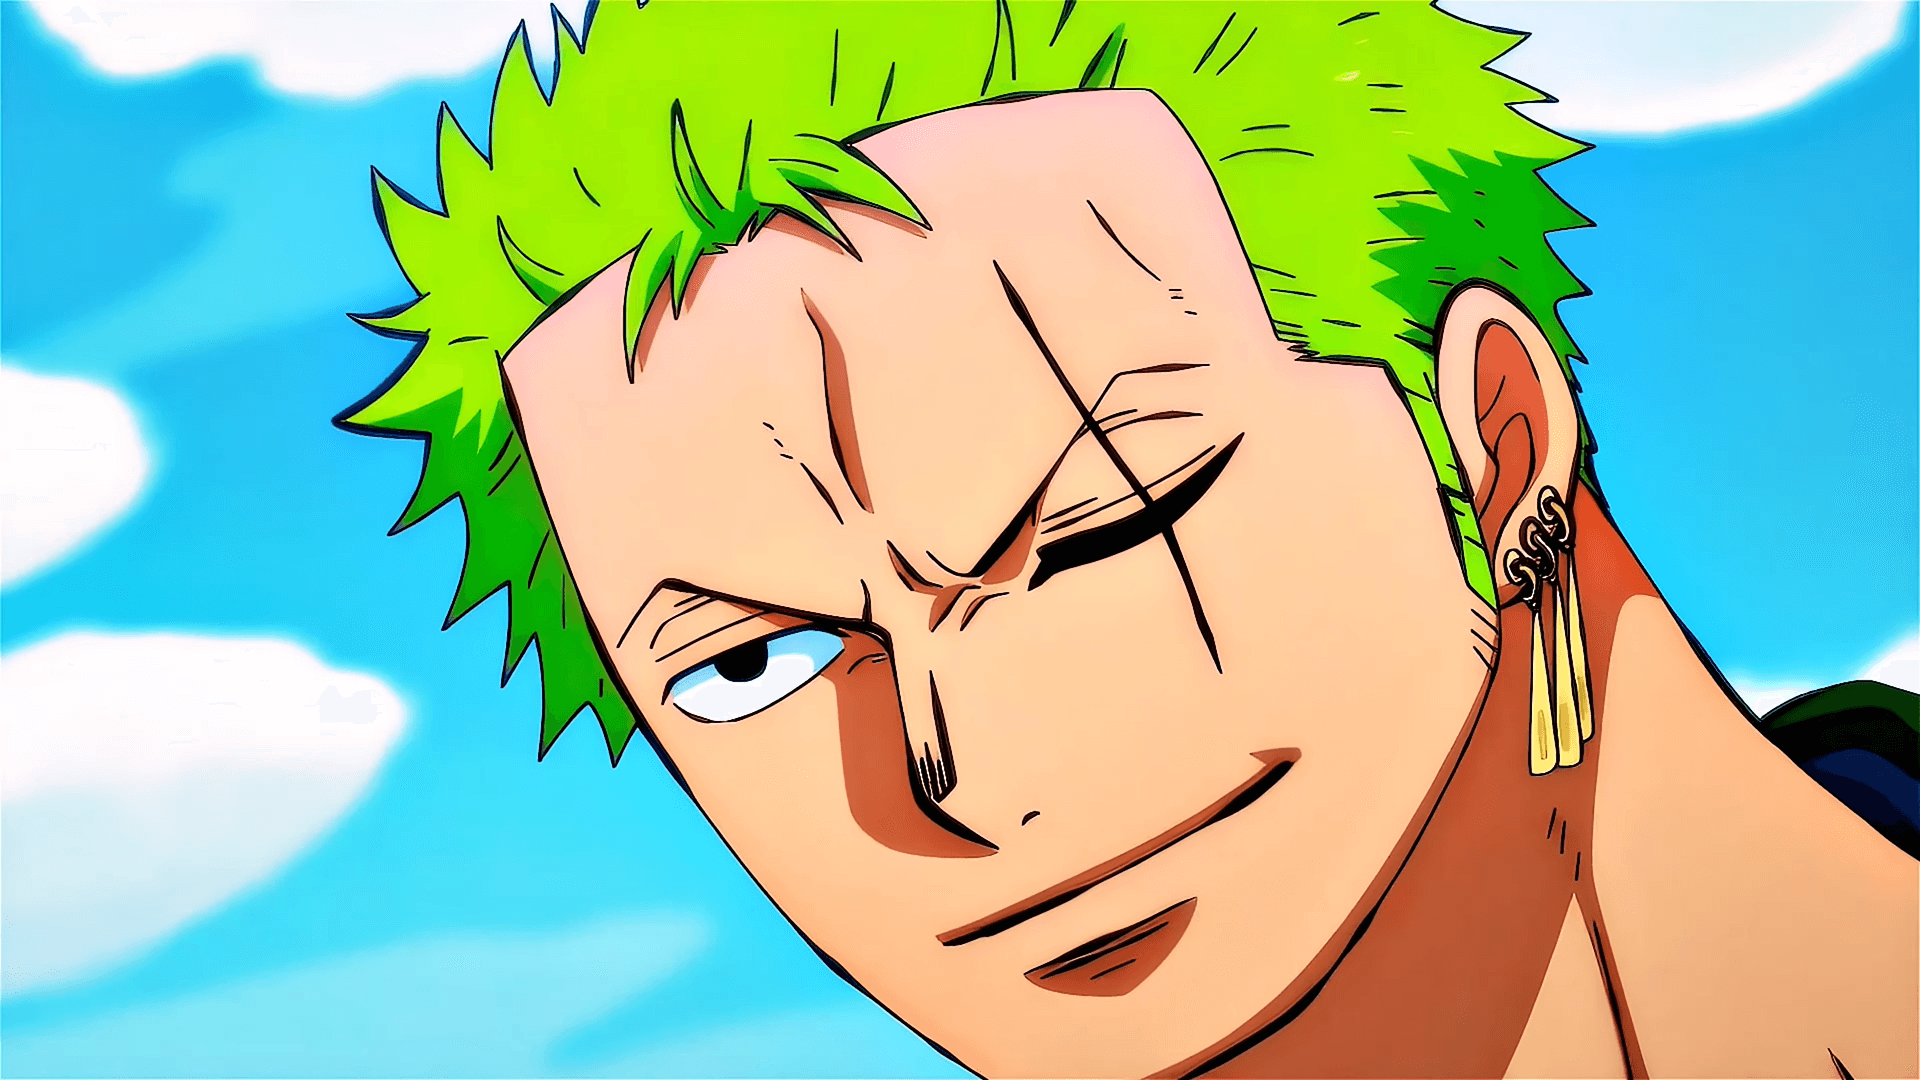 The legendary swordsman Zoro stands ready to take on any challenges that may come his way.